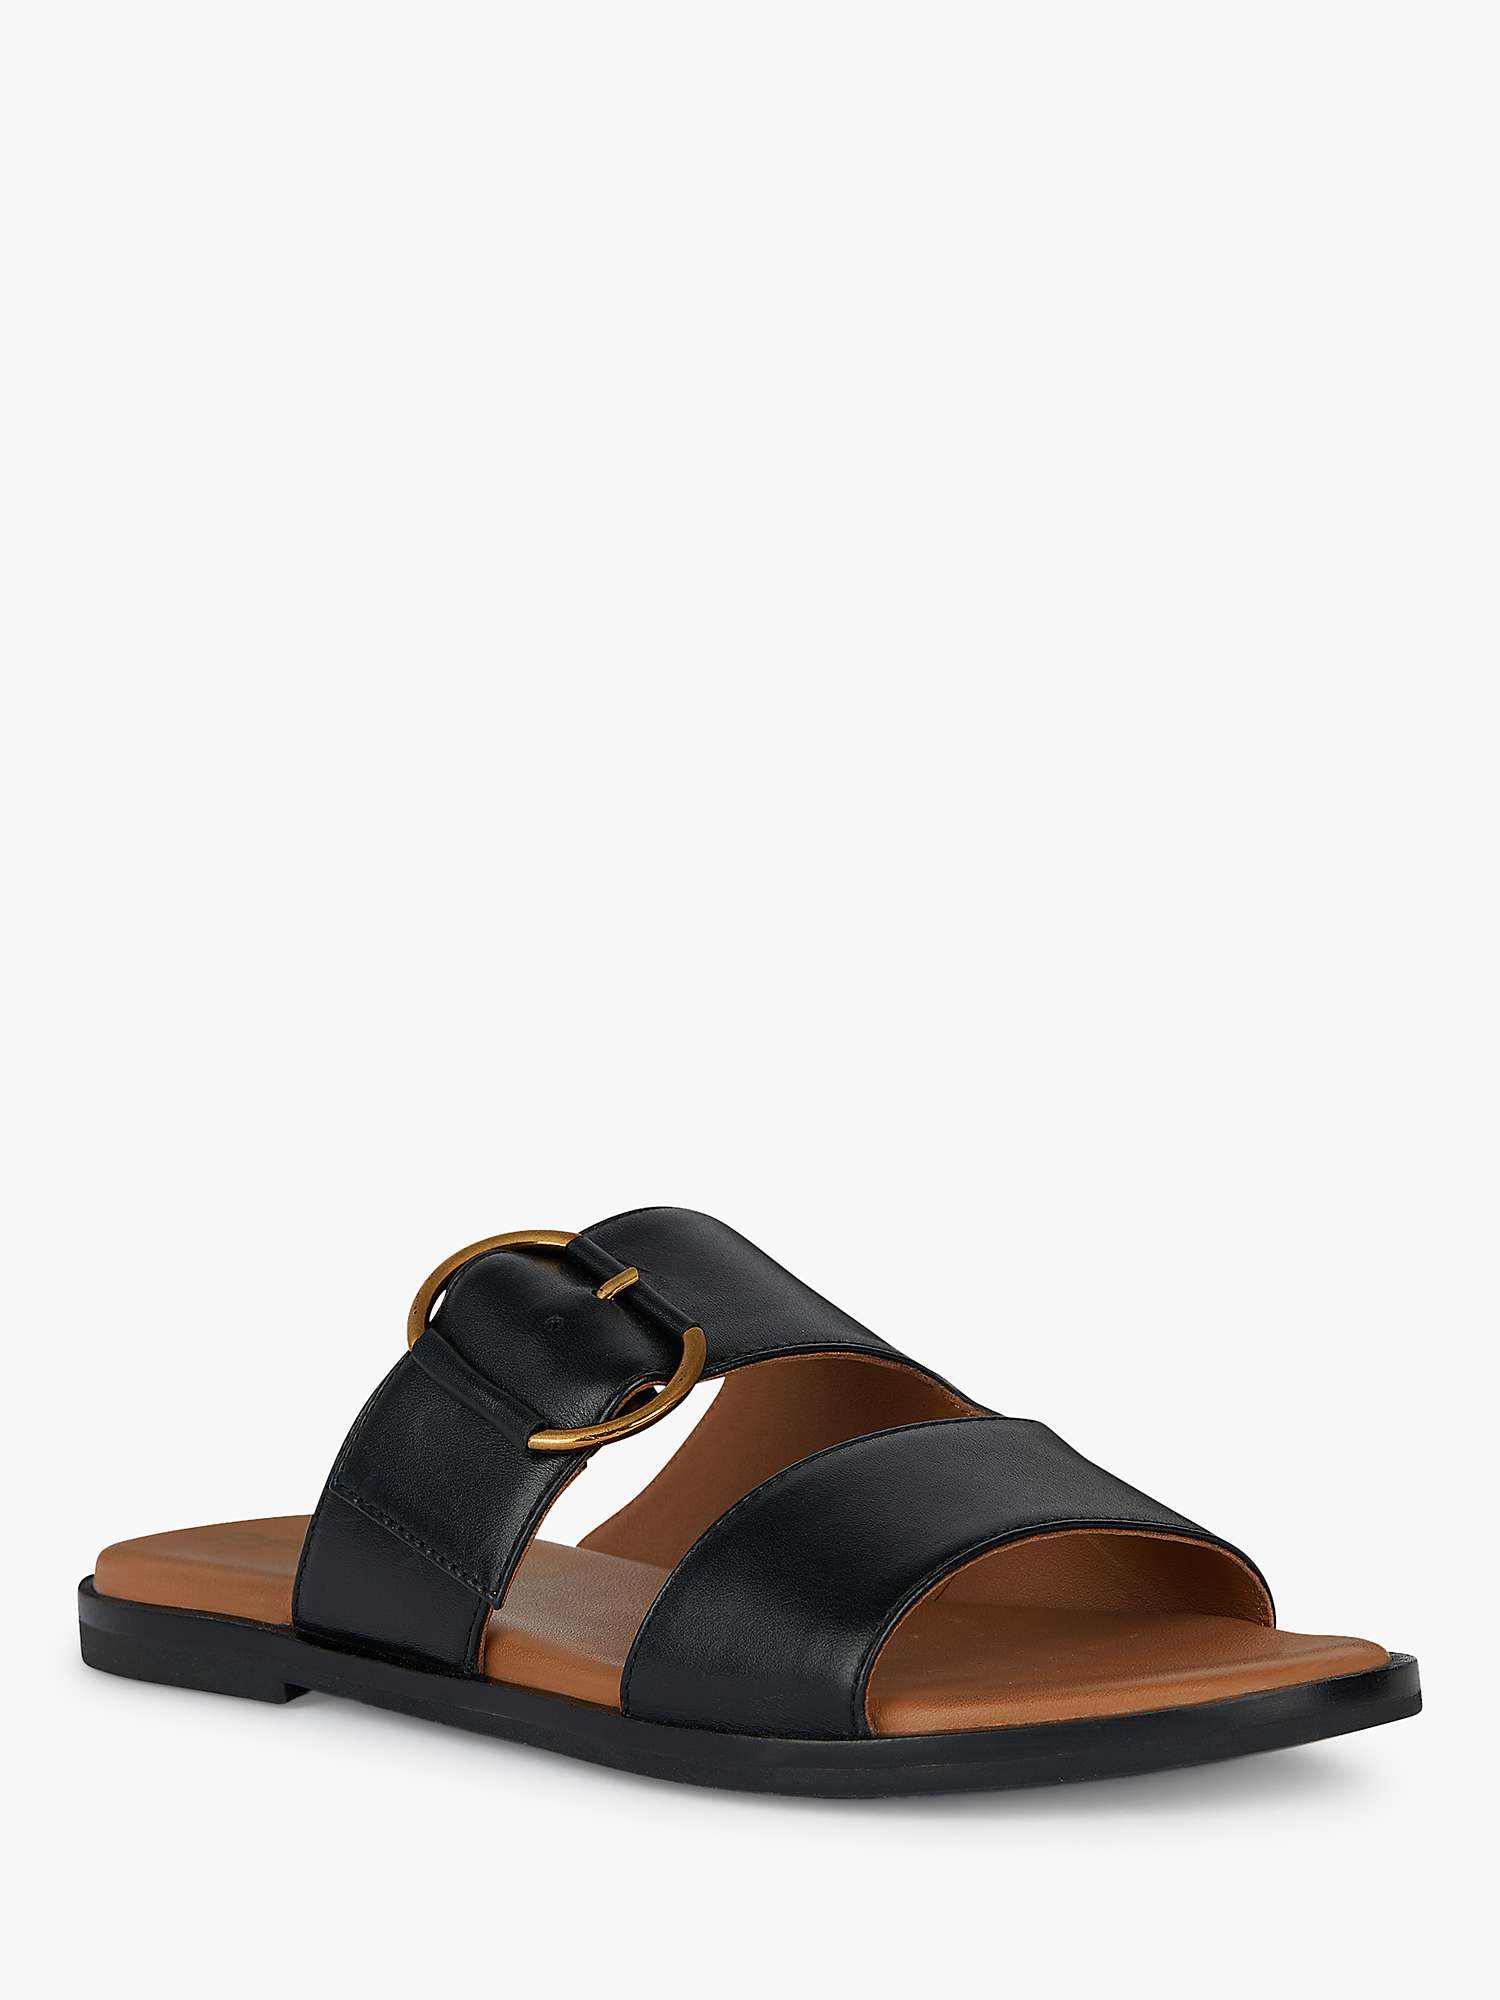 Buy Geox Naileen Leather Flat Sandals, Black Online at johnlewis.com